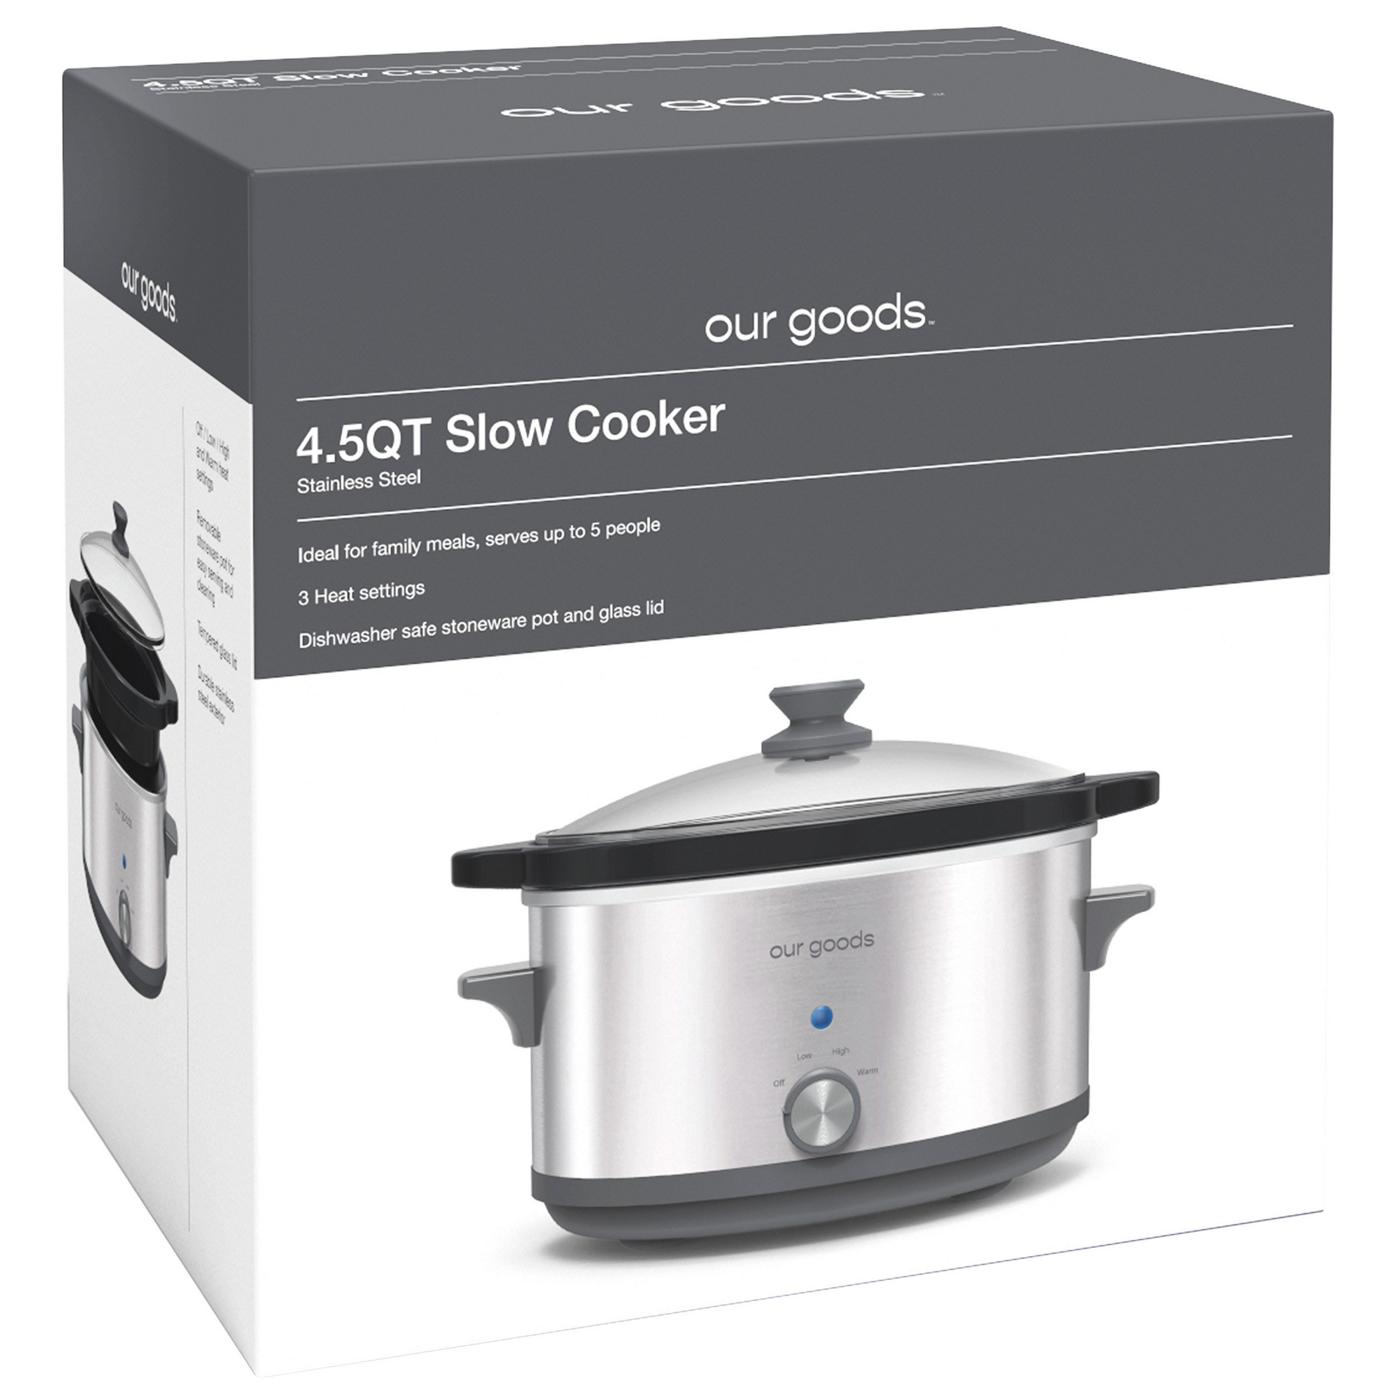 our goods Slow Cooker - Stainless Steel; image 3 of 3